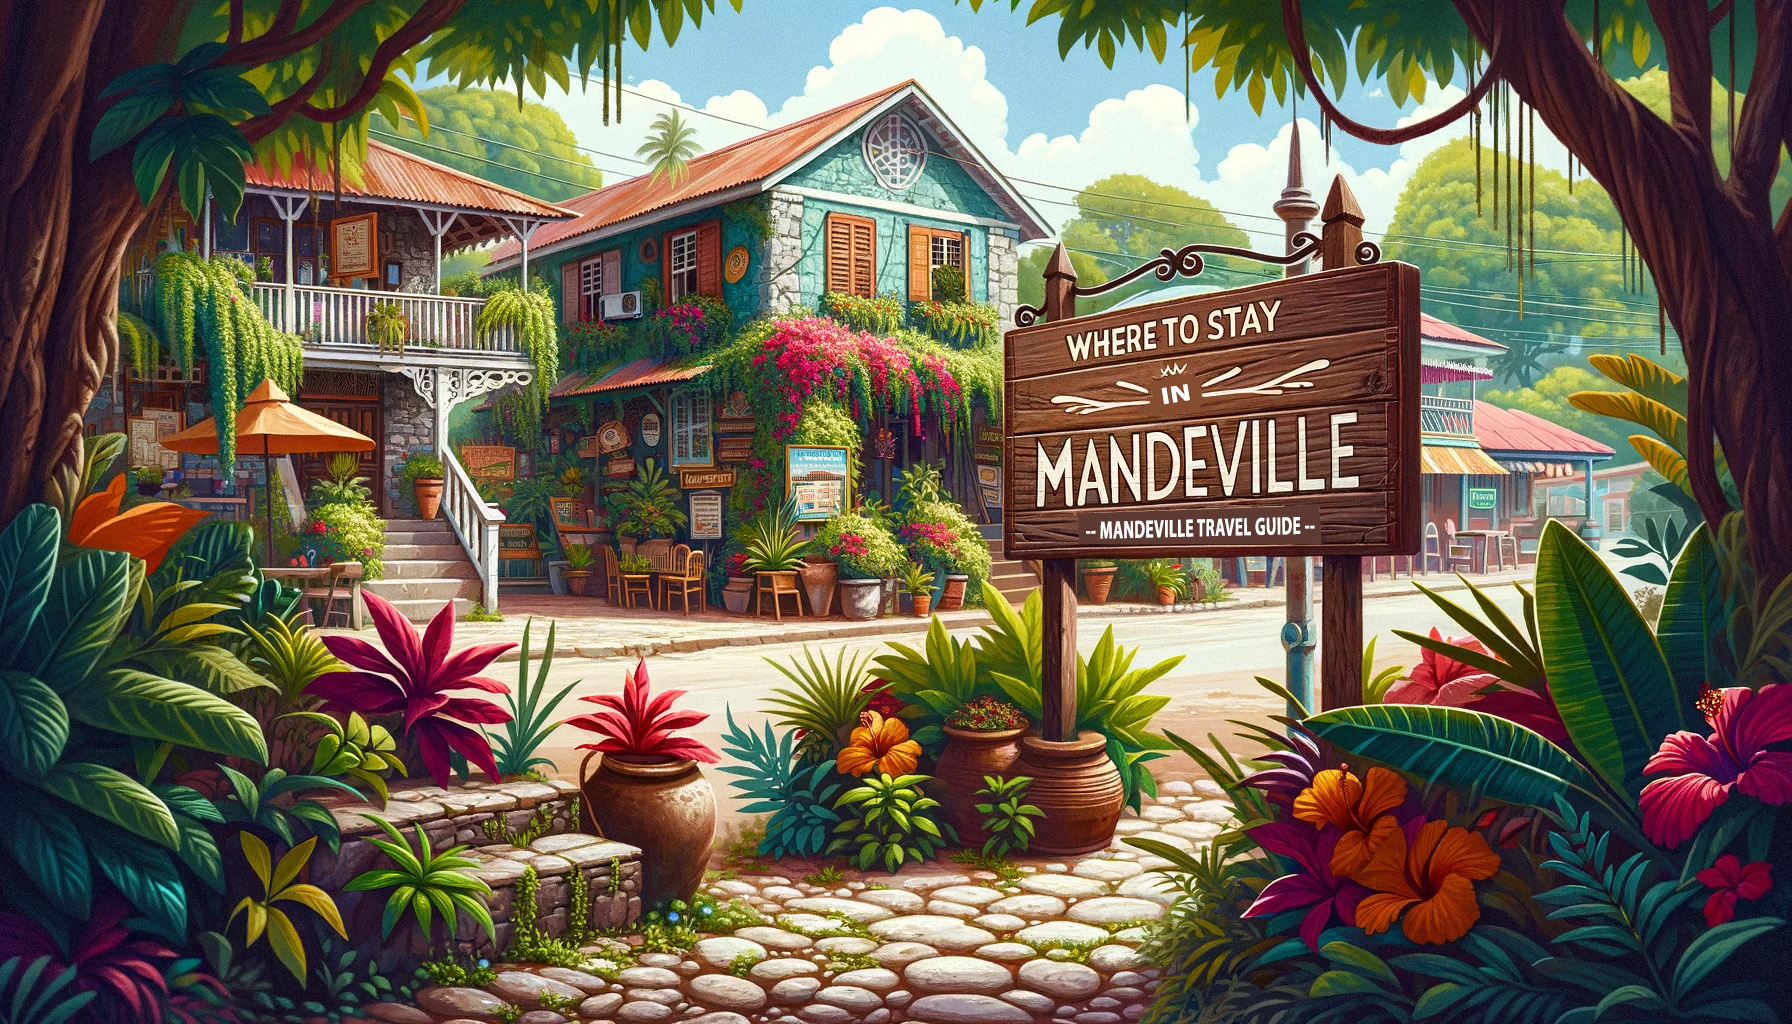 Where To Stay in Mandeville - Mandeville Travel Guide